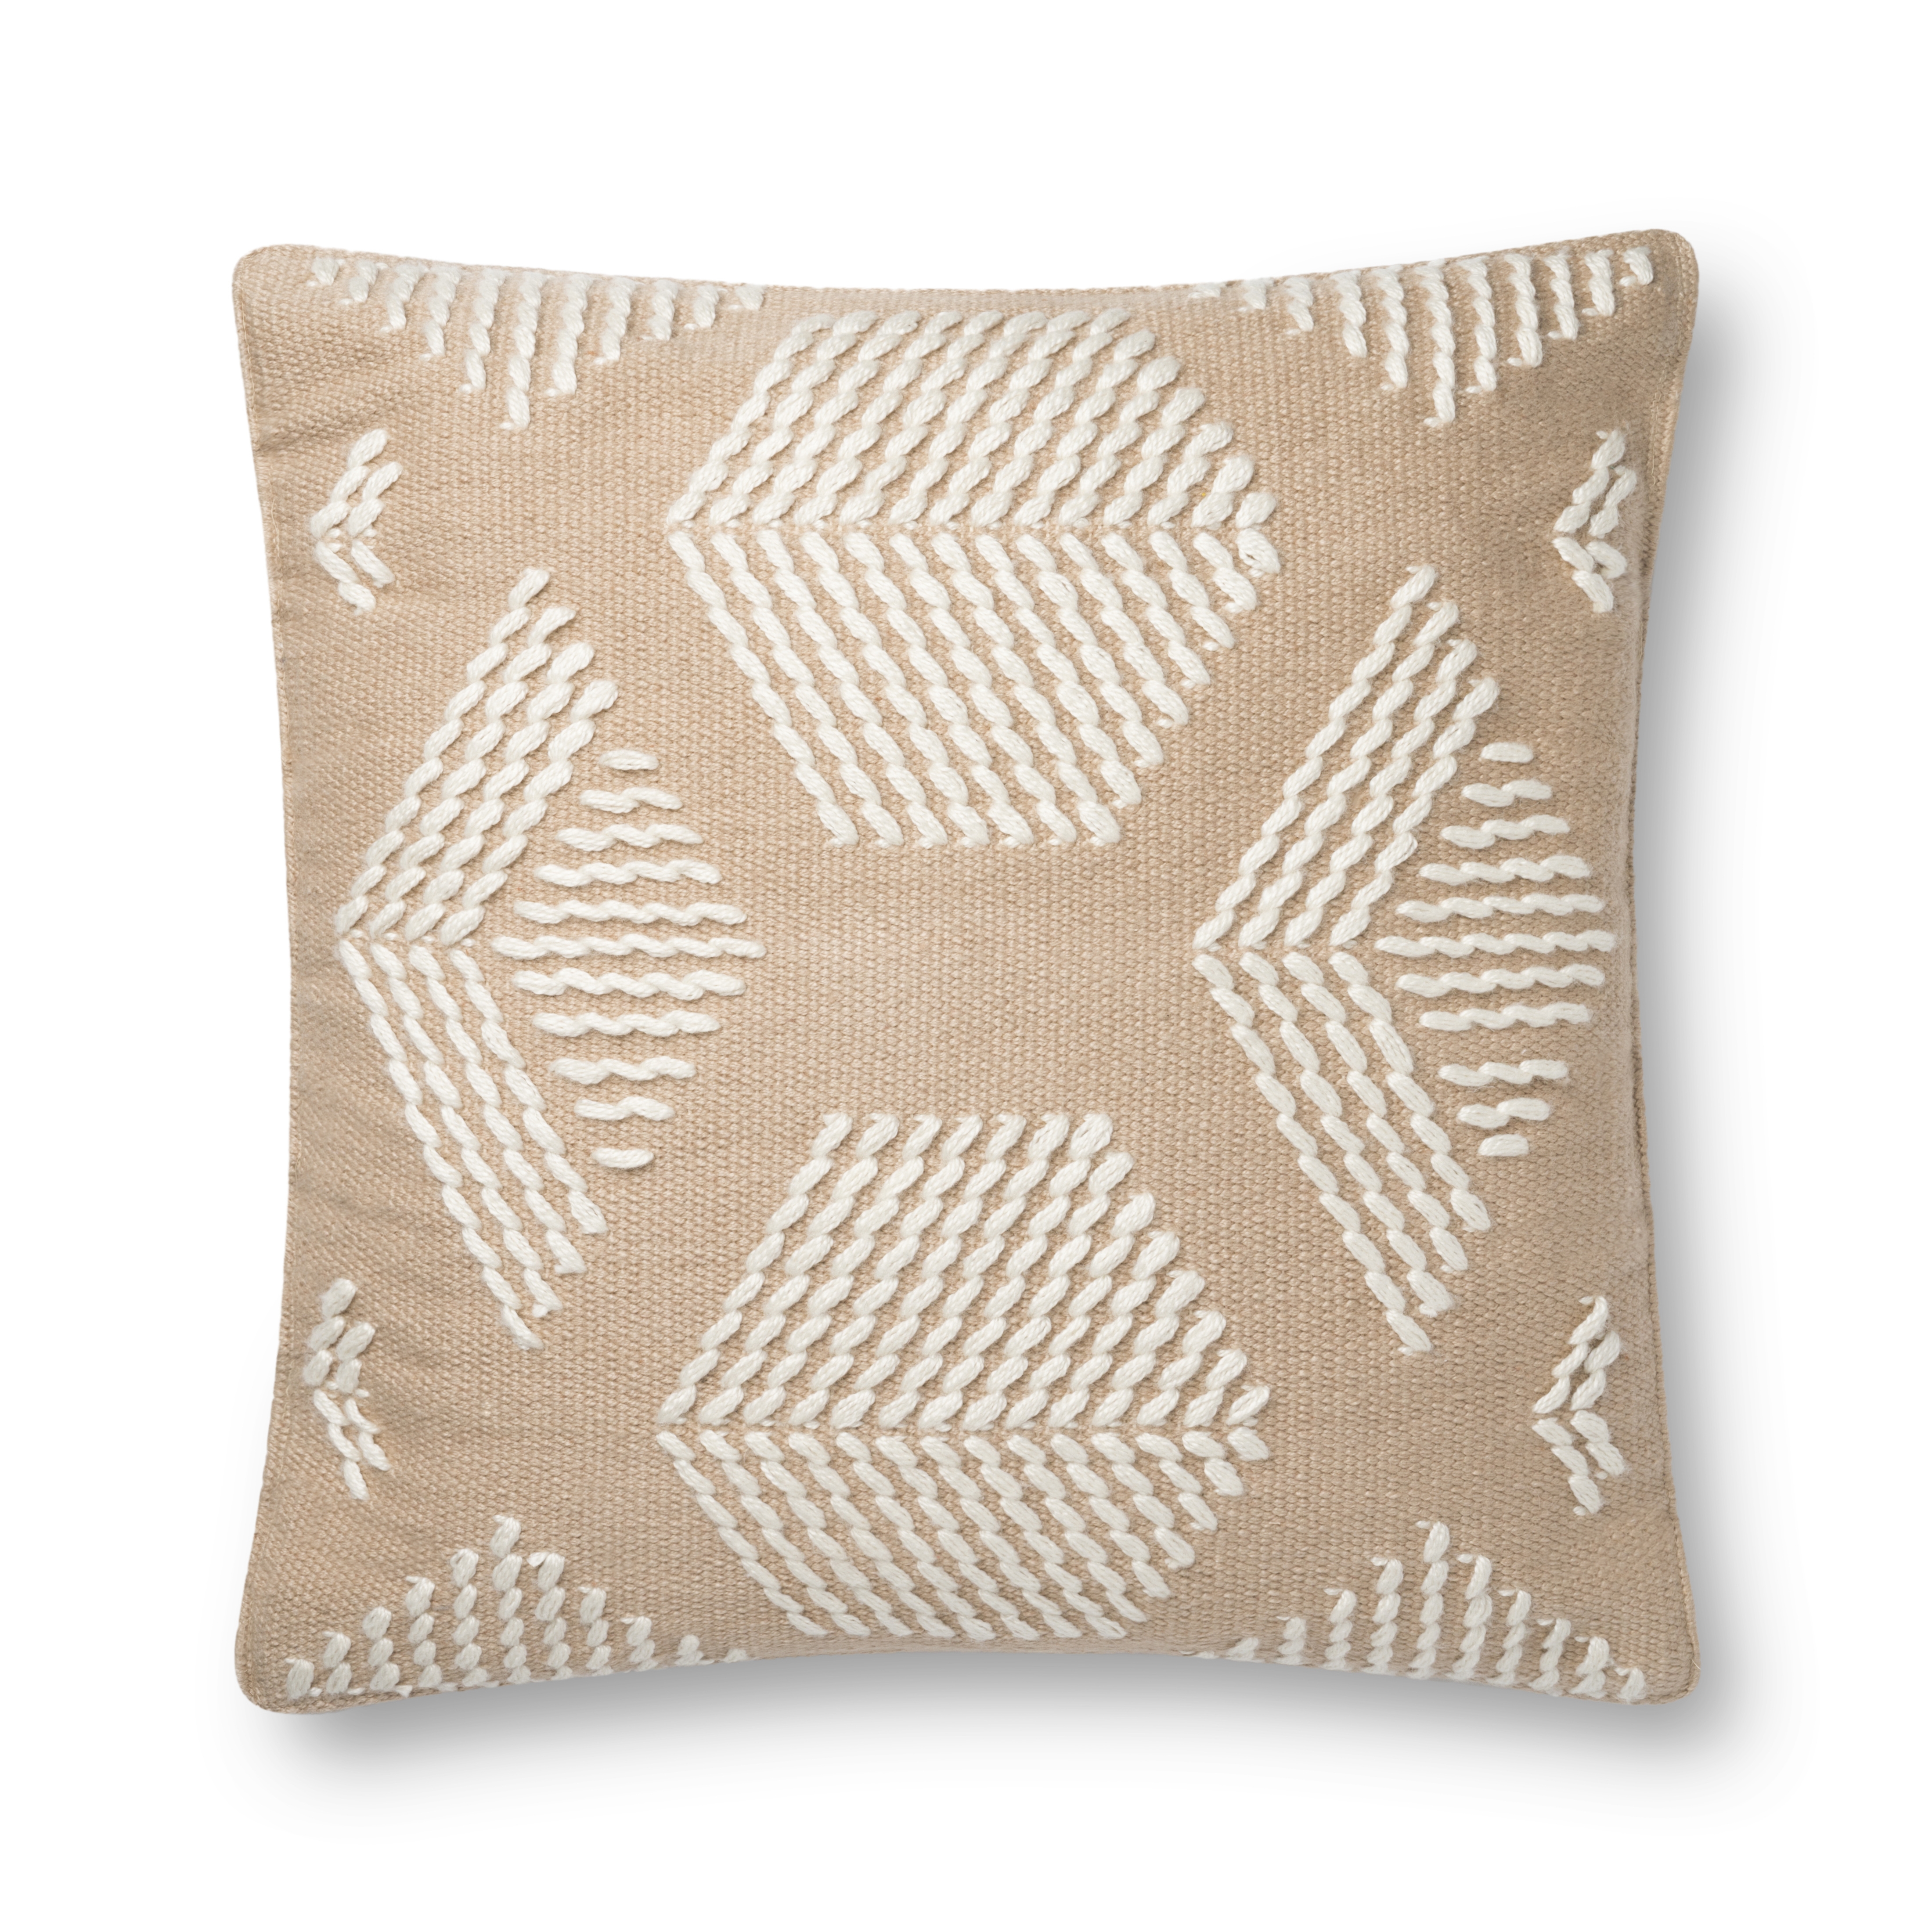 Magnolia Home by Joanna Gaines x Loloi Pillows P1120 Sand / Ivory 22" x 22" Cover Only - Image 0